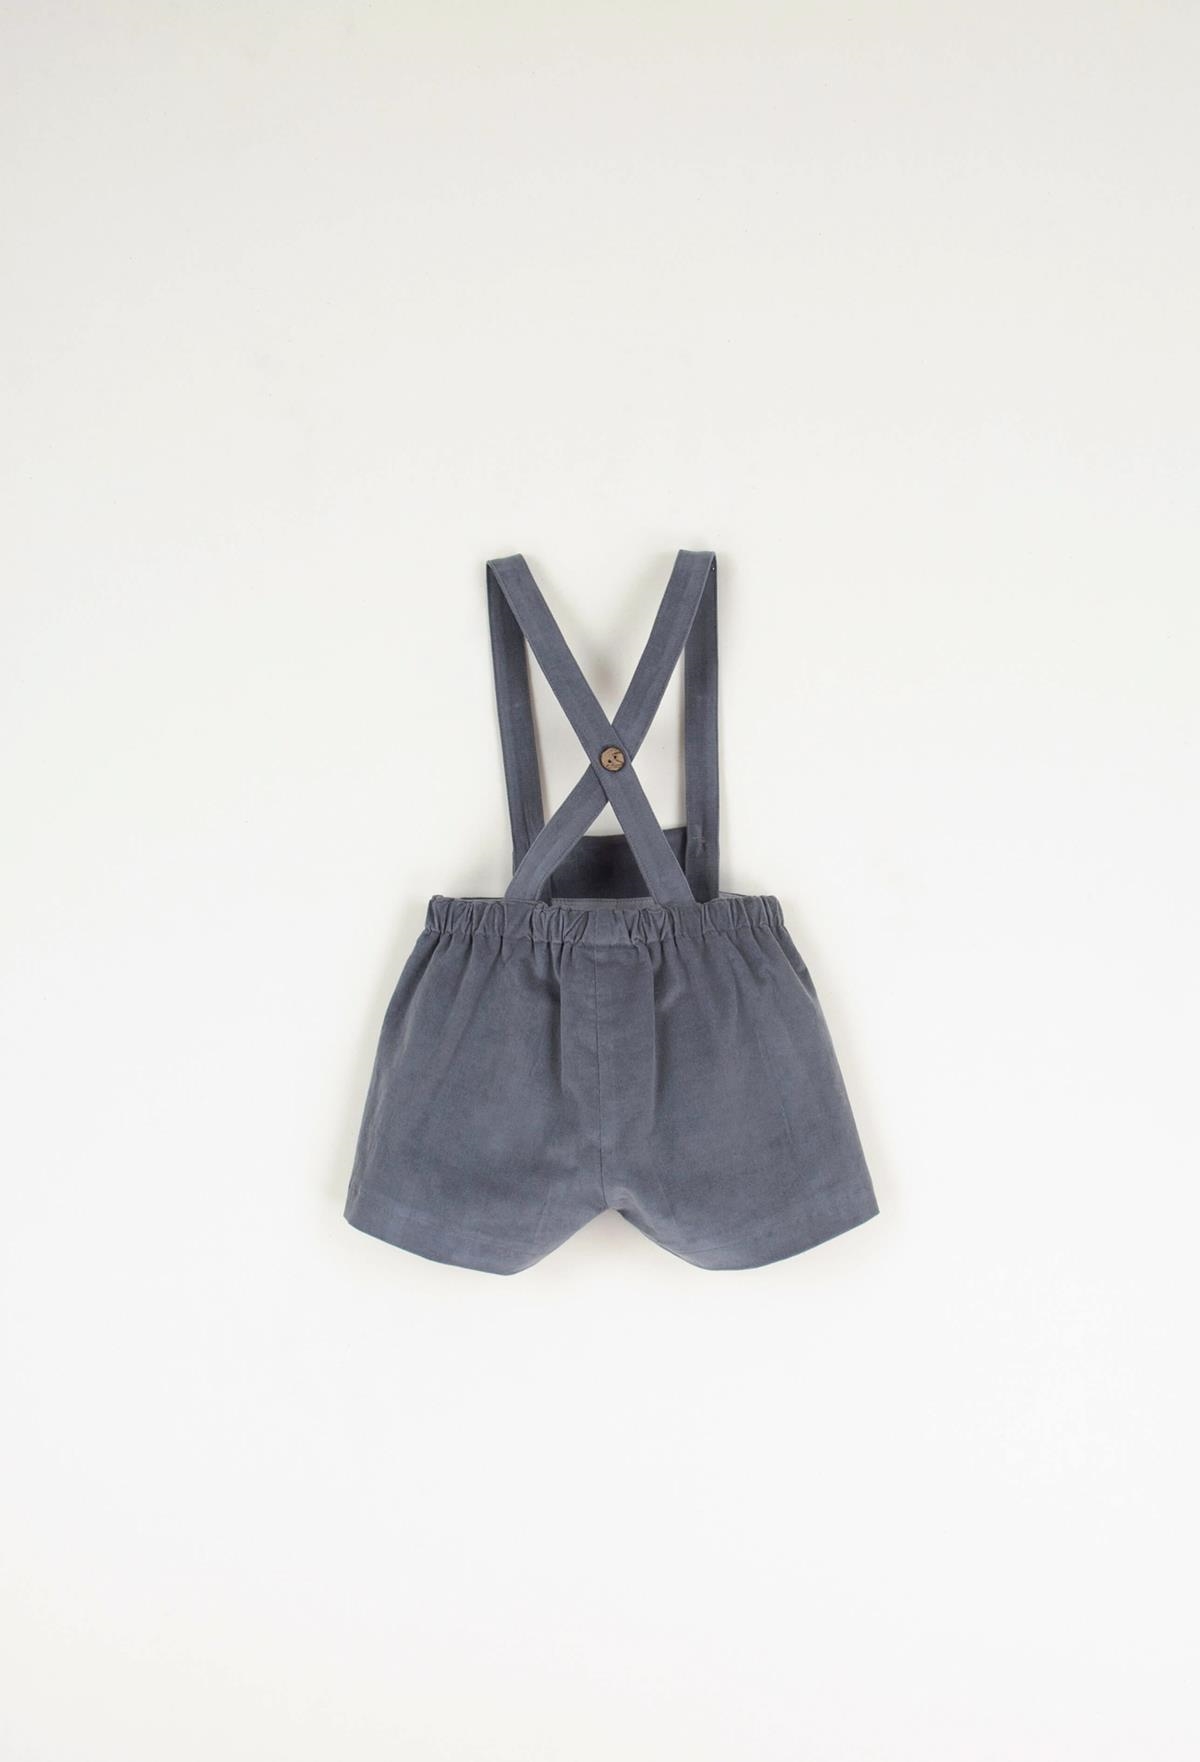 Mod.6.2 Grey dungarees with crossover straps | AW22.23 Mod.6.2 Grey dungarees with crossover straps